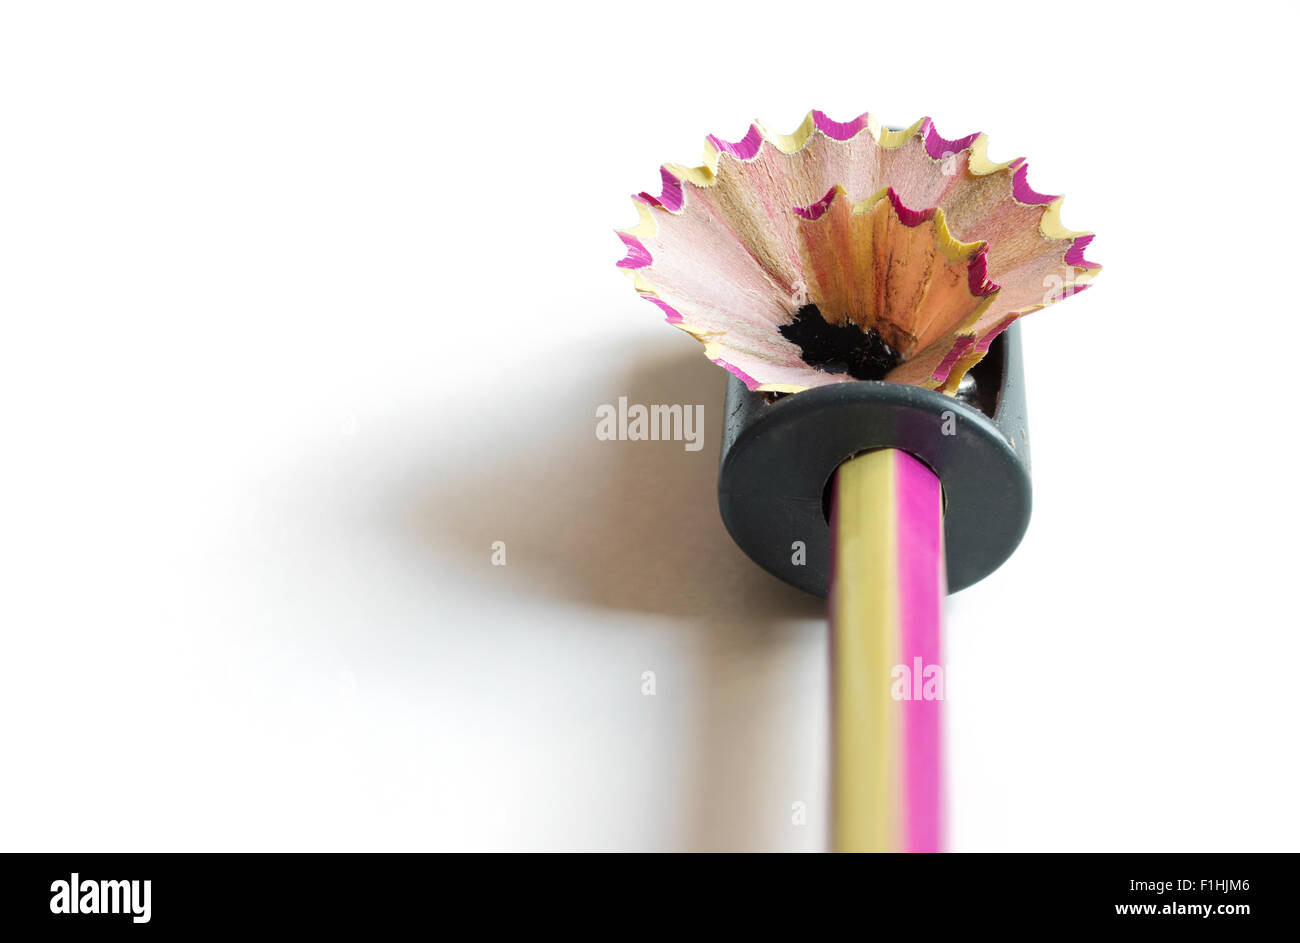 pencil with sharpening shavings on white background Stock Photo